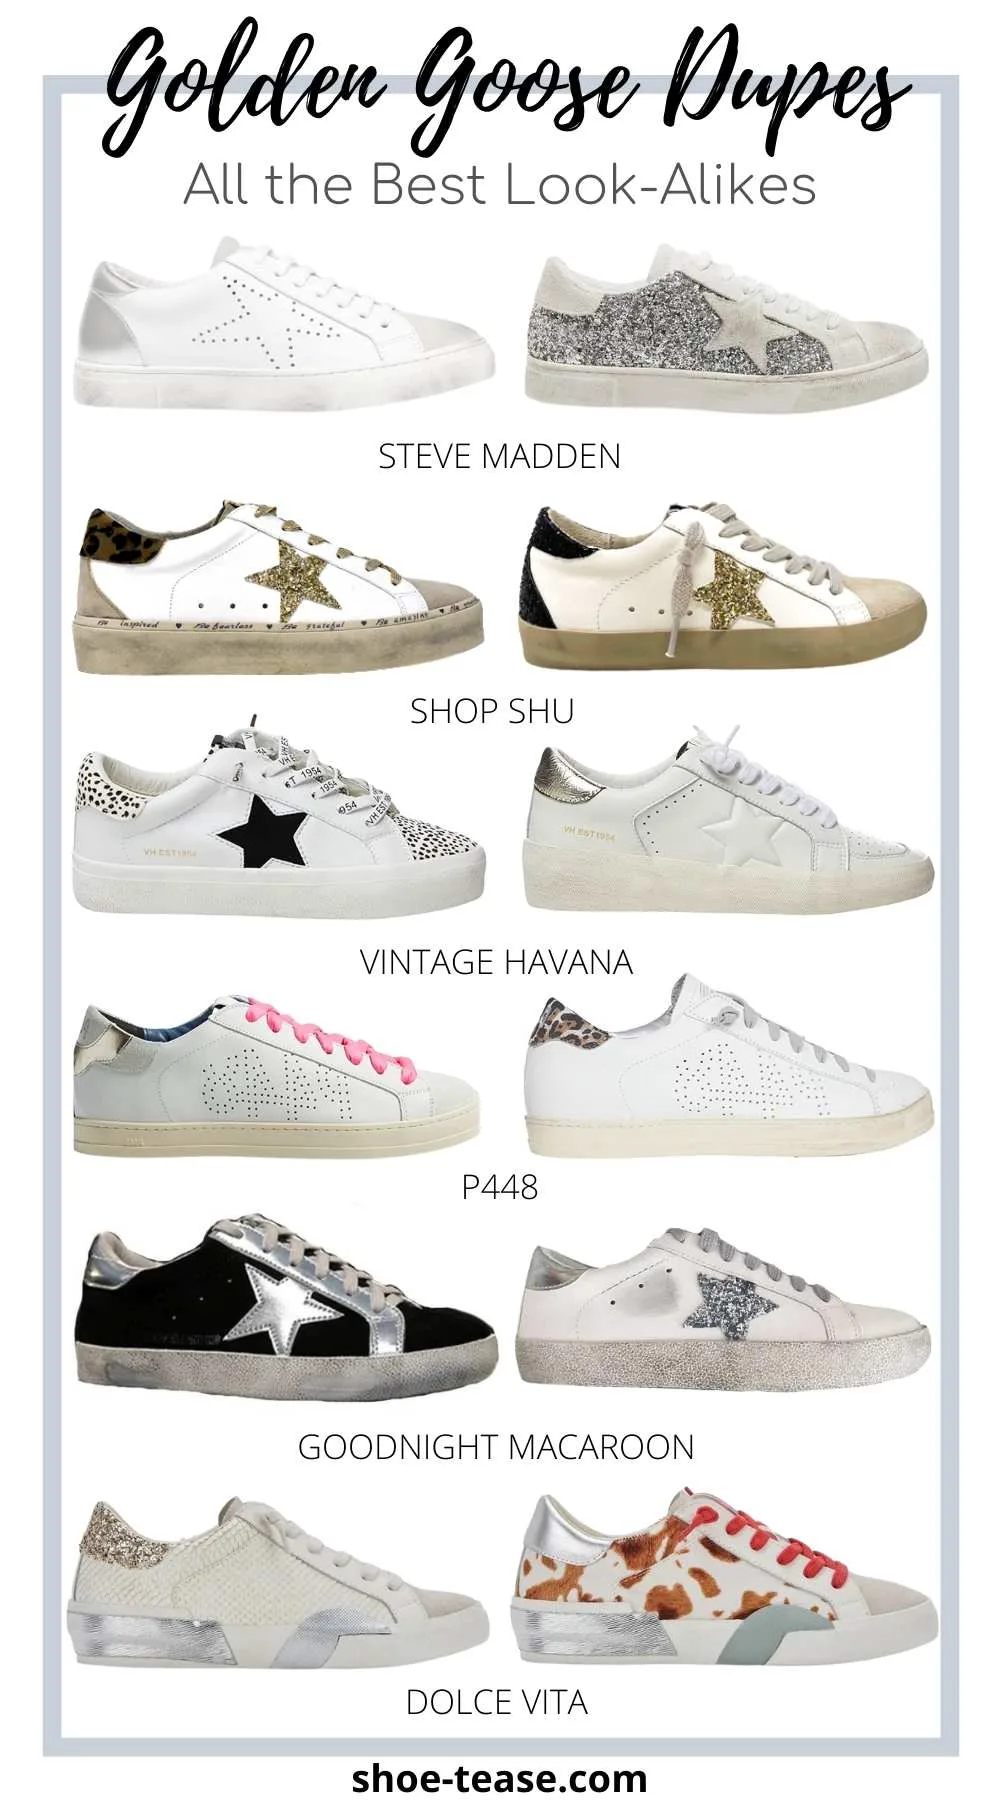 Collage of 12 best fake golden goose dupes from various retailers.